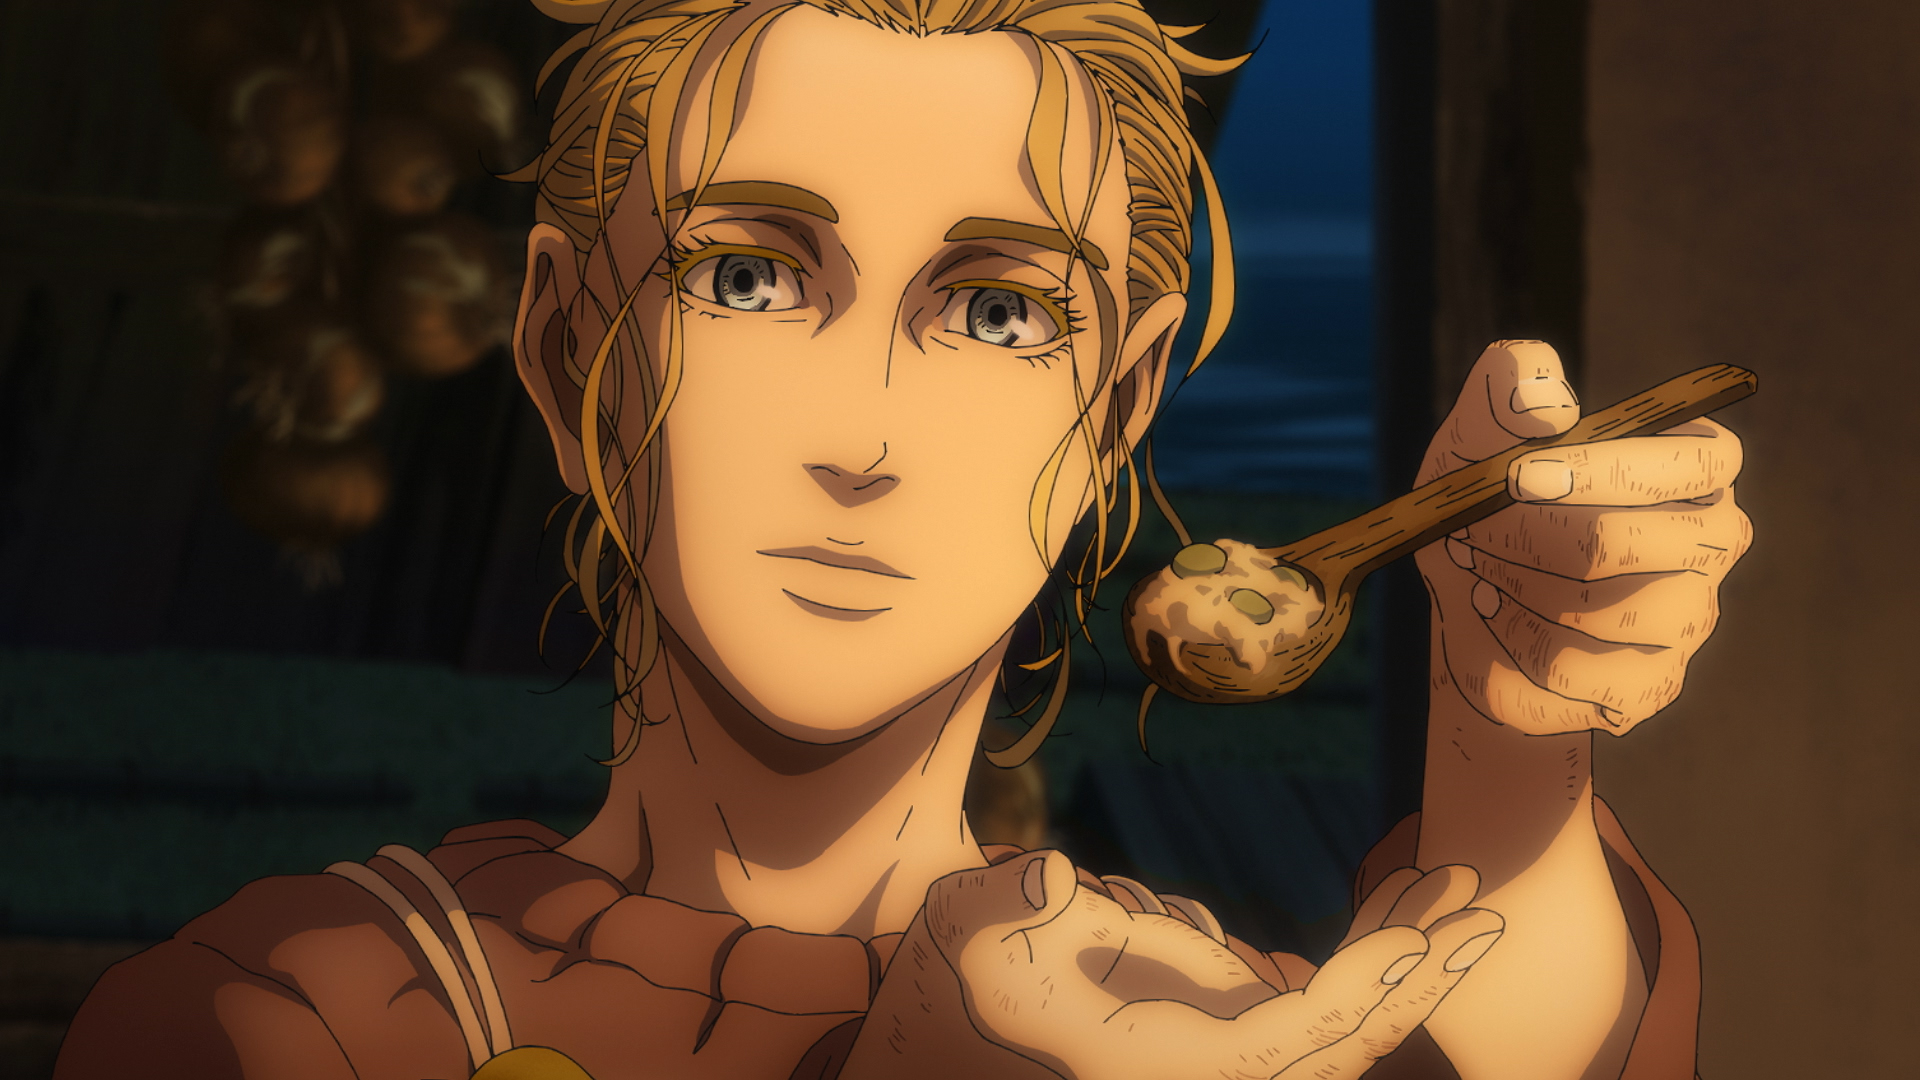 Anime Corner News - OFFICIAL: VINLAND SAGA Season 2 has revealed new  trailers for the 2nd cour, featuring the new opening and ending songs!  Watch: acani.me/vinland-cour2 The anime will continue into the